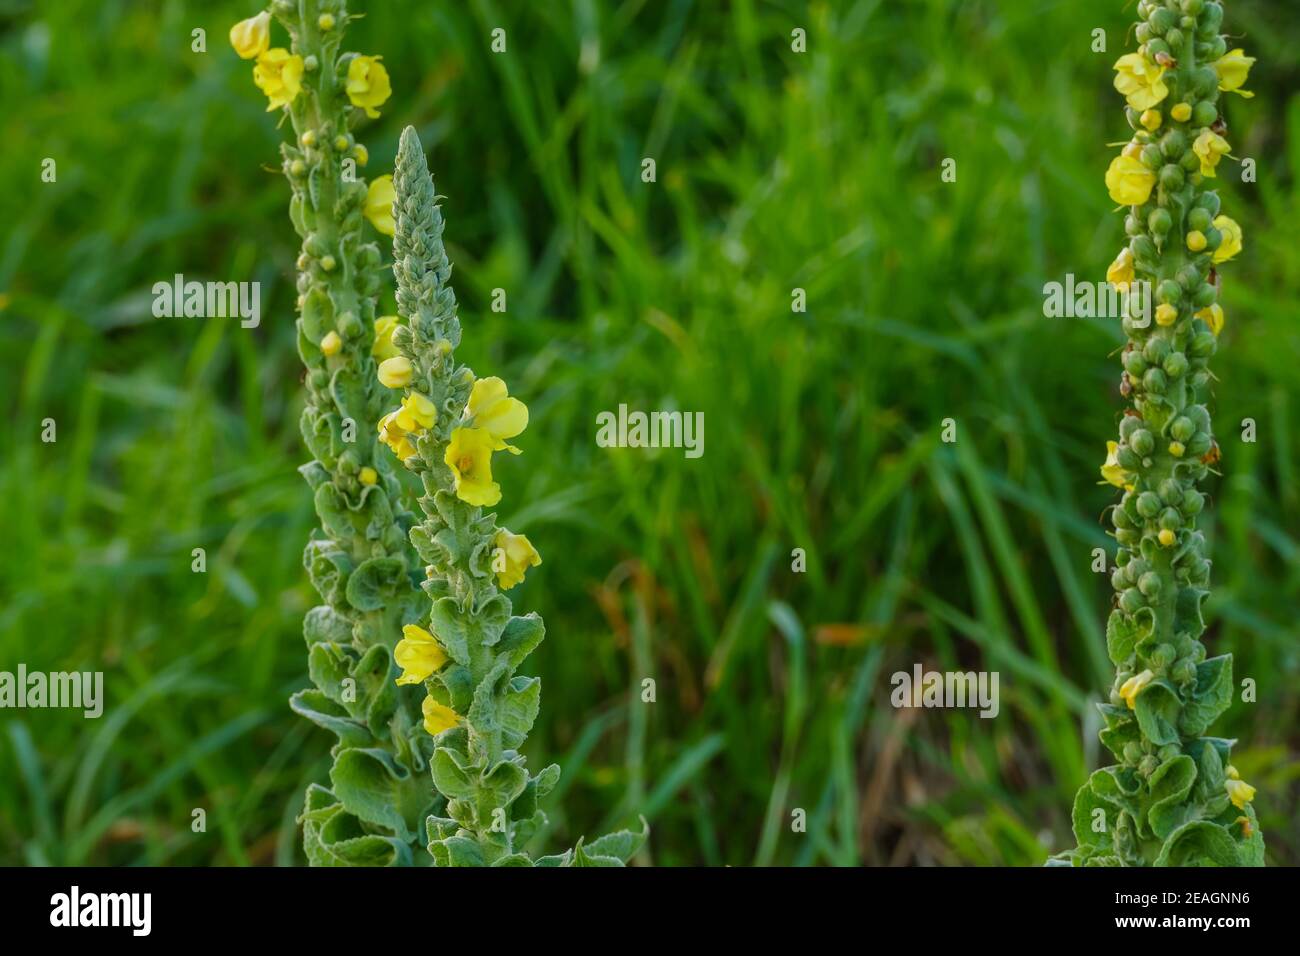 plants common mullein with flowers growing outdoors close up view Stock Photo